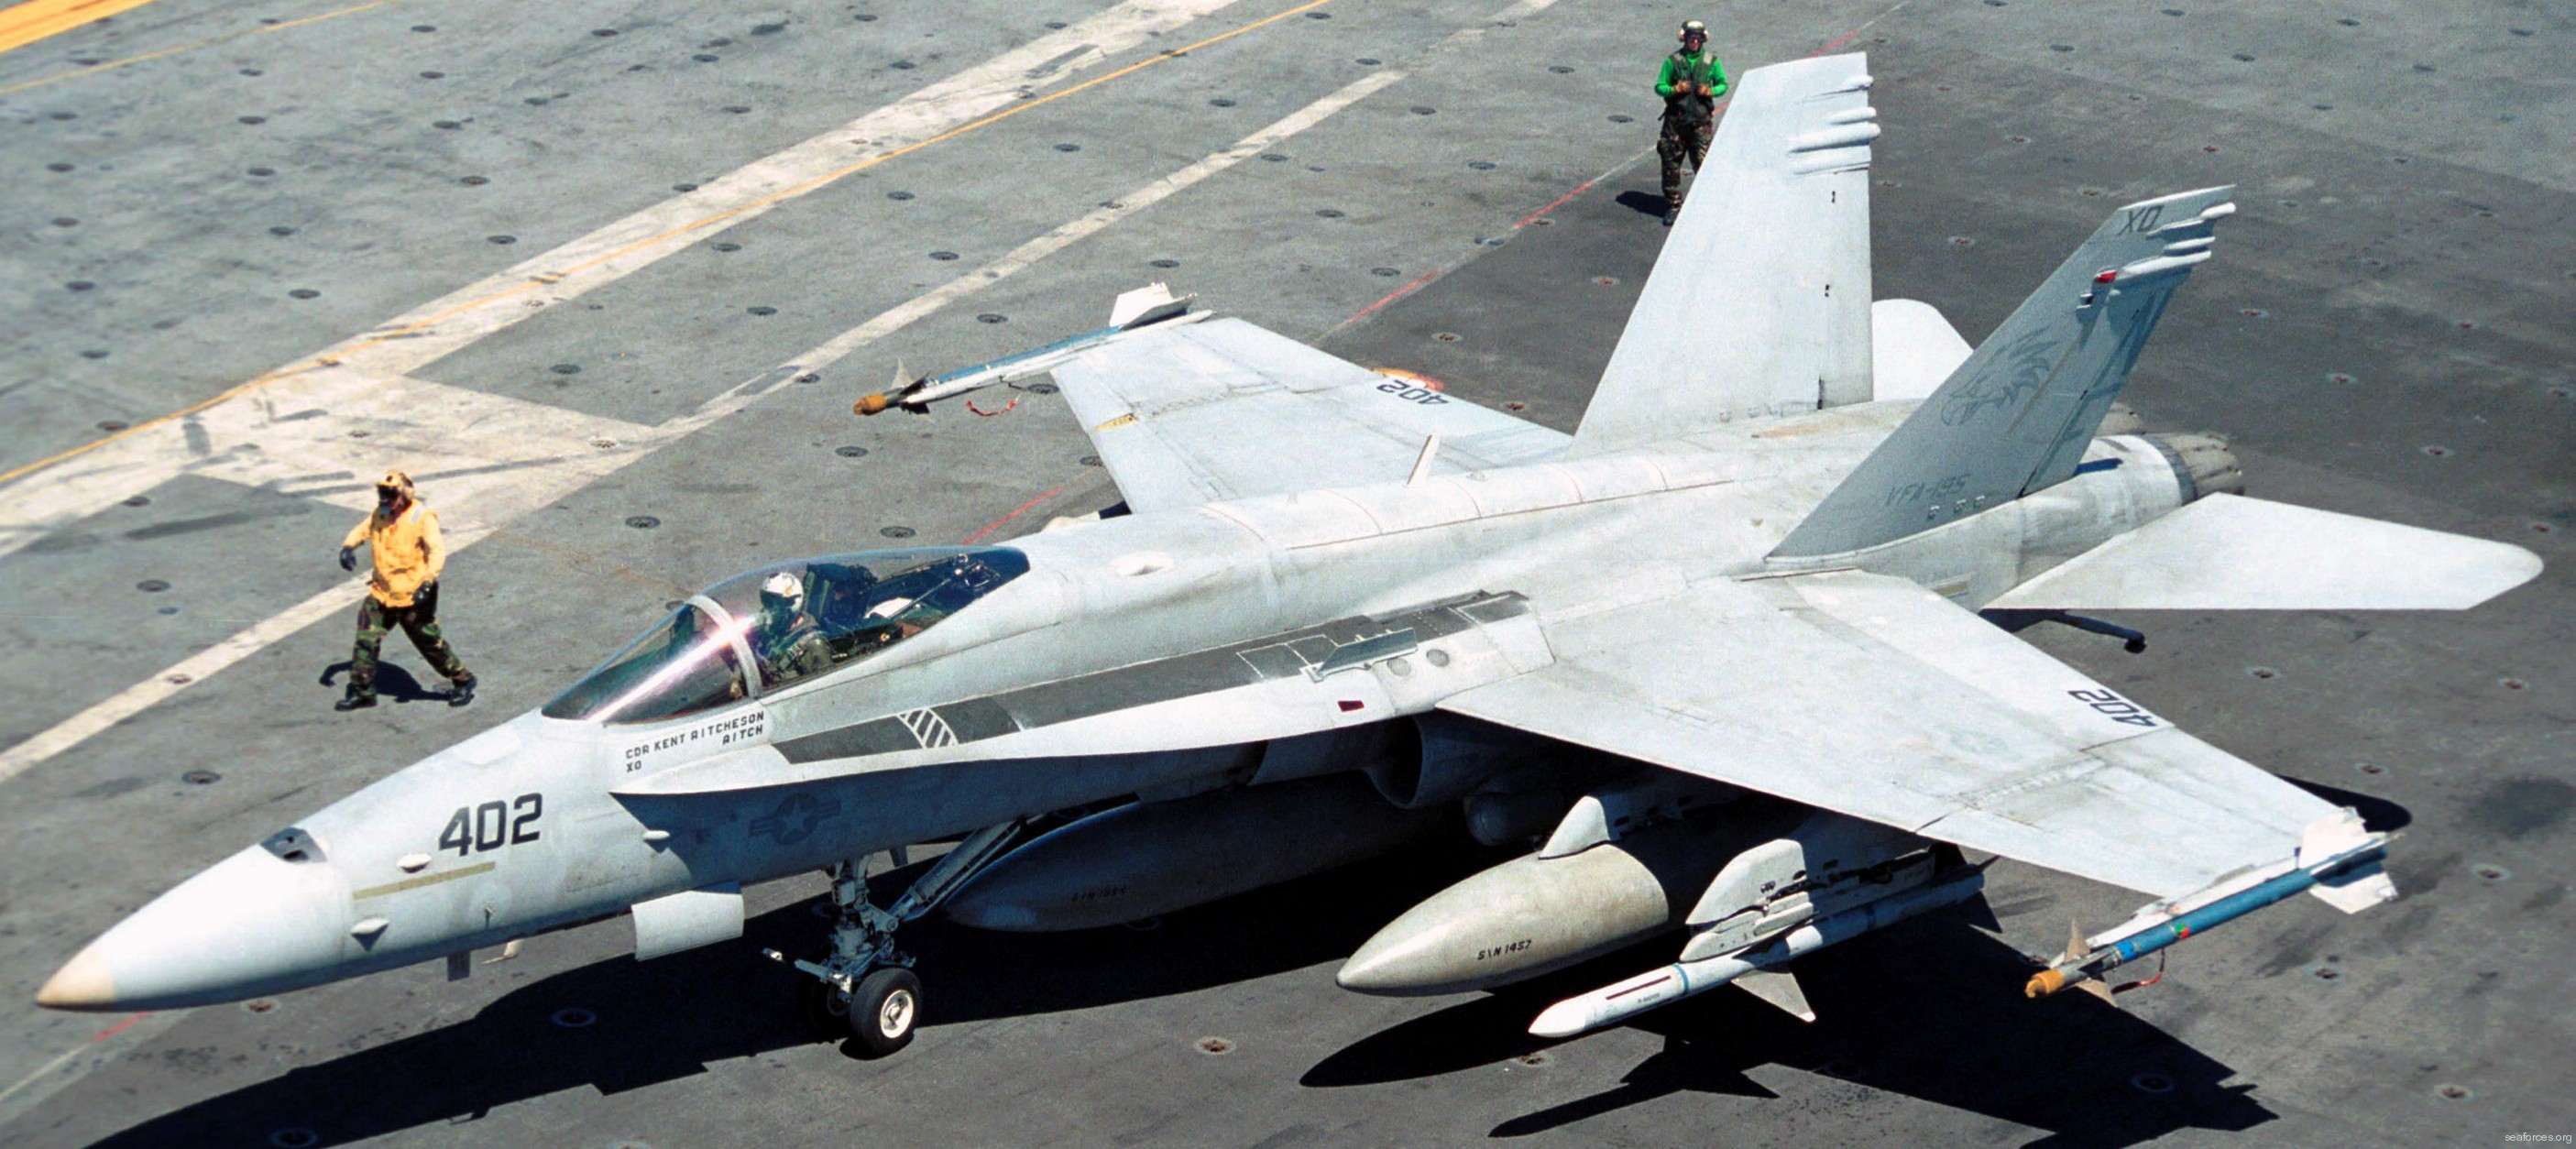 vfa-195 dambusters strike fighter squadron navy f/a-18c hornet carrier air wing cvw-5 uss kitty hawk cv-63 88